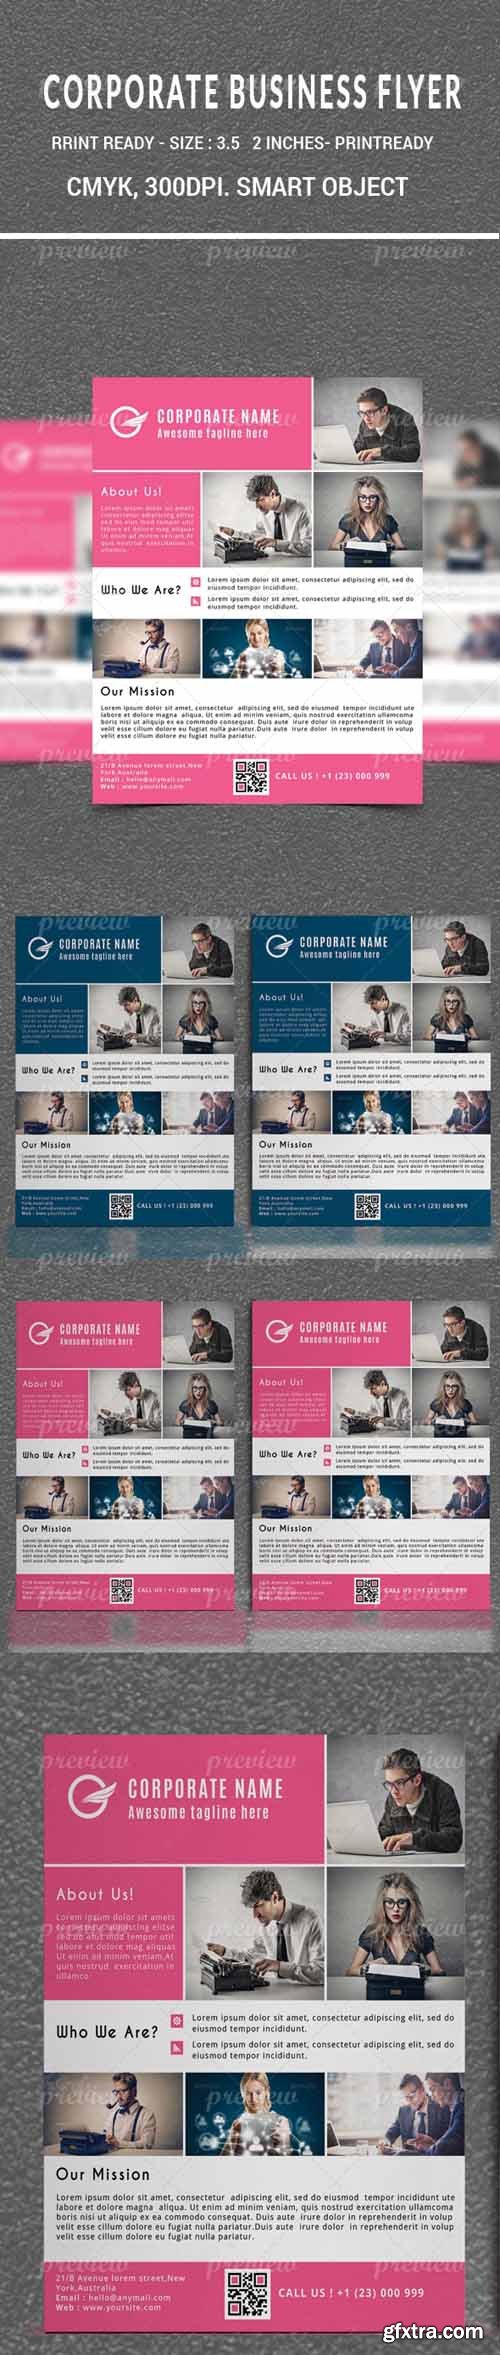 Corporate Business Flyer 4749